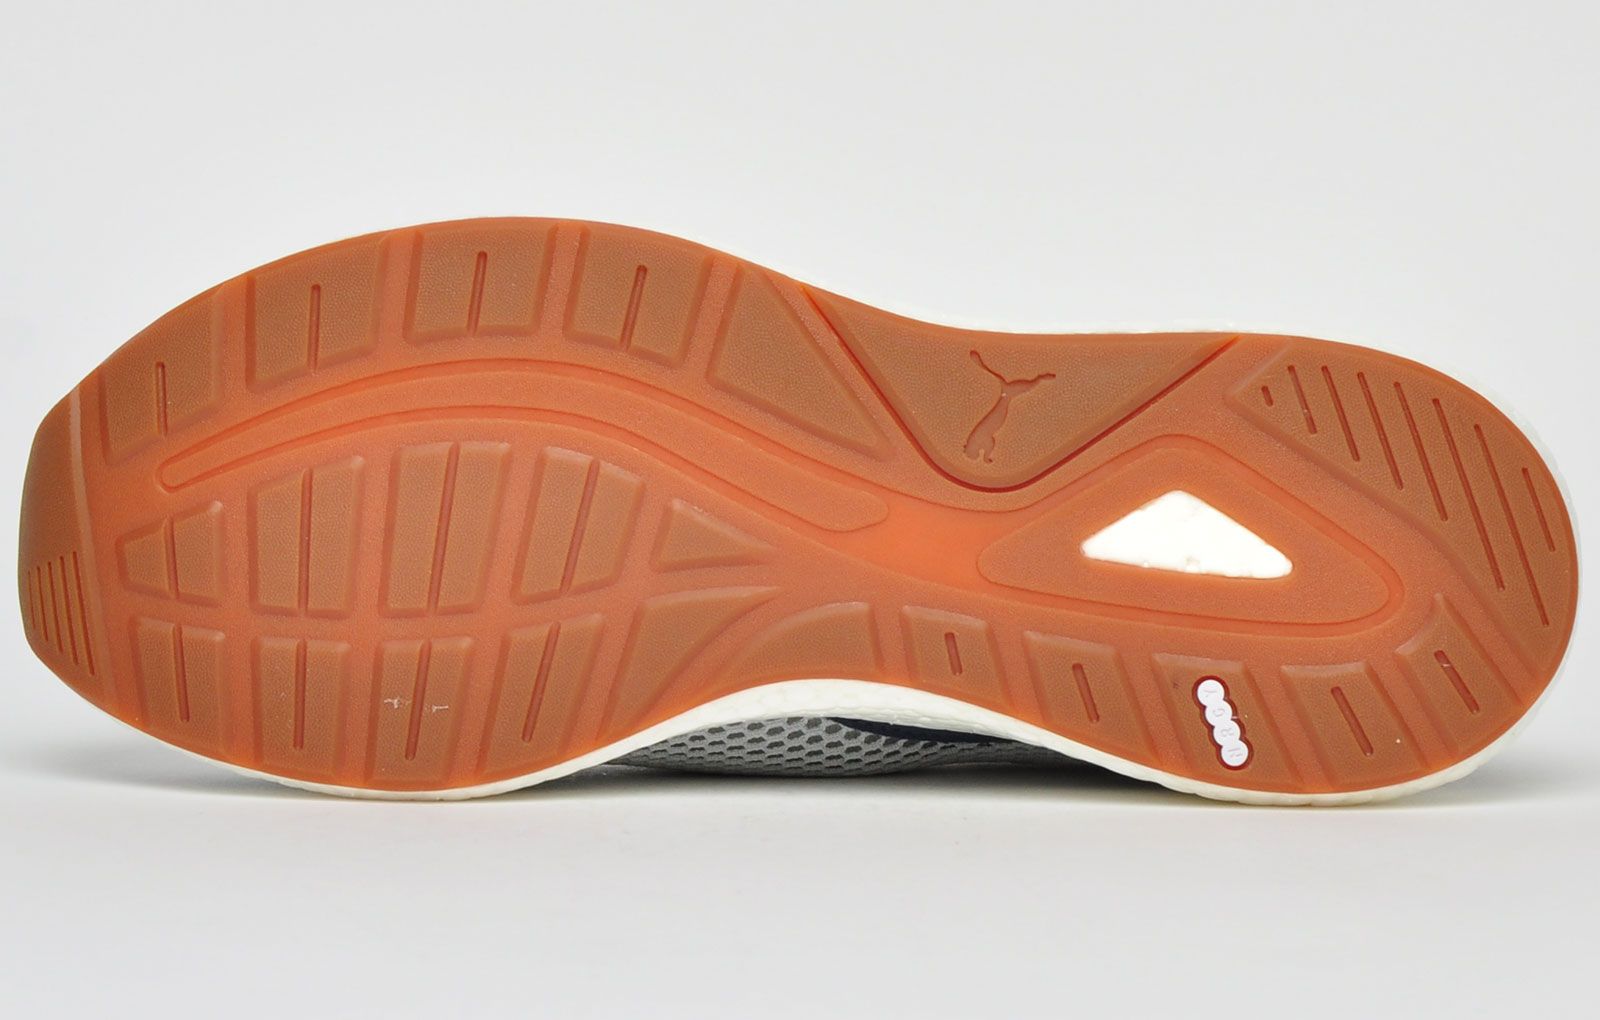 <p>The NRGY Neko combines performance and style featuring supportive breathable textile uppers with synthetic suede overlays that provide protection and structural support for optimal fit while you run or hit the gym.</p> <p>Additional comfort is provided with the PU SoftFoam+ sockliner to give you a seamless ride as well as an NRGY Foam midsole enhancing the shoe’s rebound properties increasing the runner’s performance.</p> <p>A flexible collar complements the shoe to deliver a more convenient, and optimal step-in comfort finished with a full-length durable outsole comprising of the NRGY Neko Skim to provide traction and grip on varied surfaces.</p> <p style=